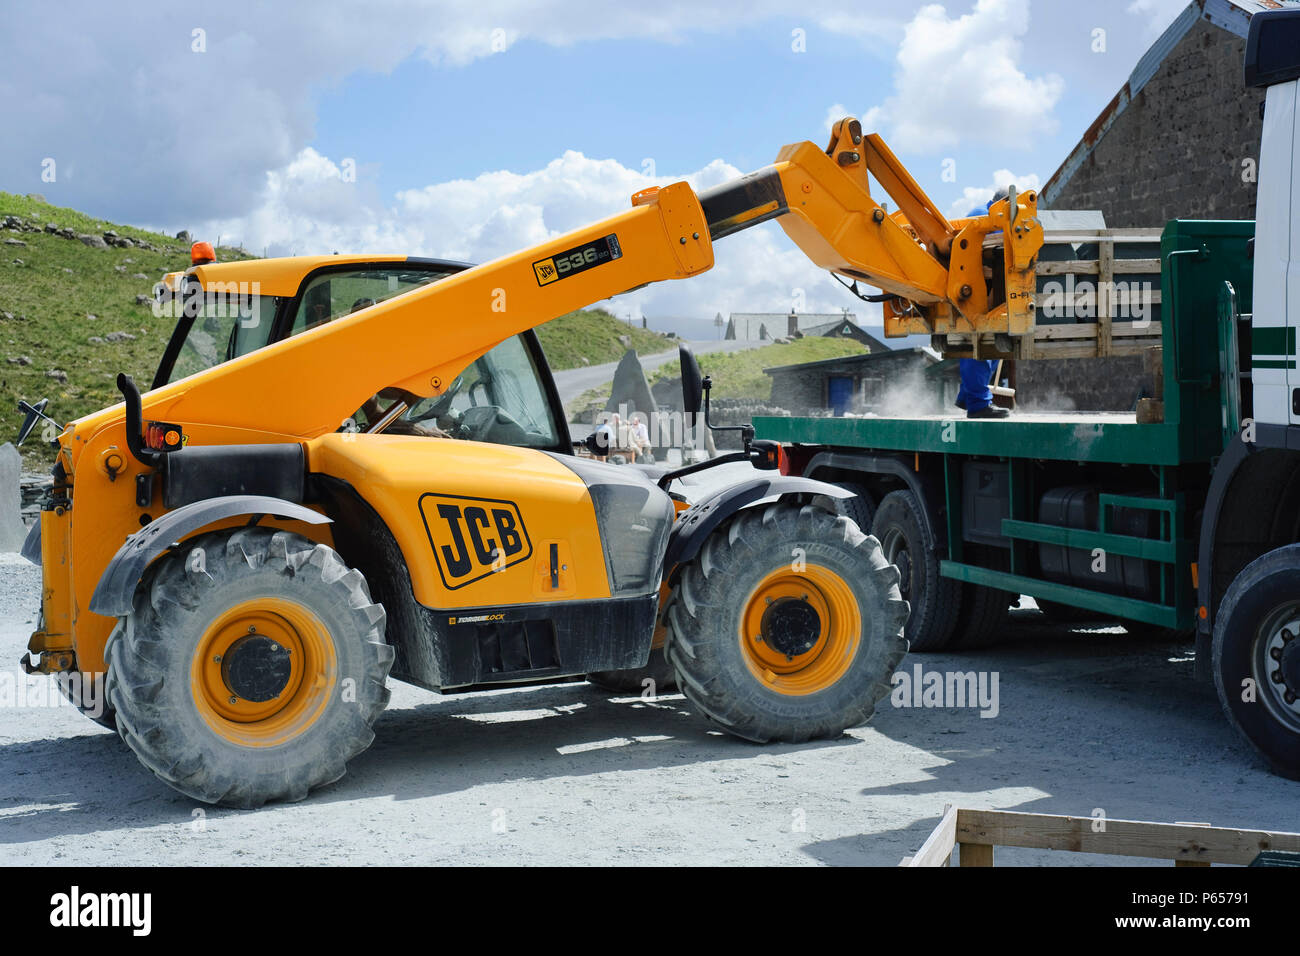 JCB telescopic forklift lifting materials from flat bed truck Stock Photo